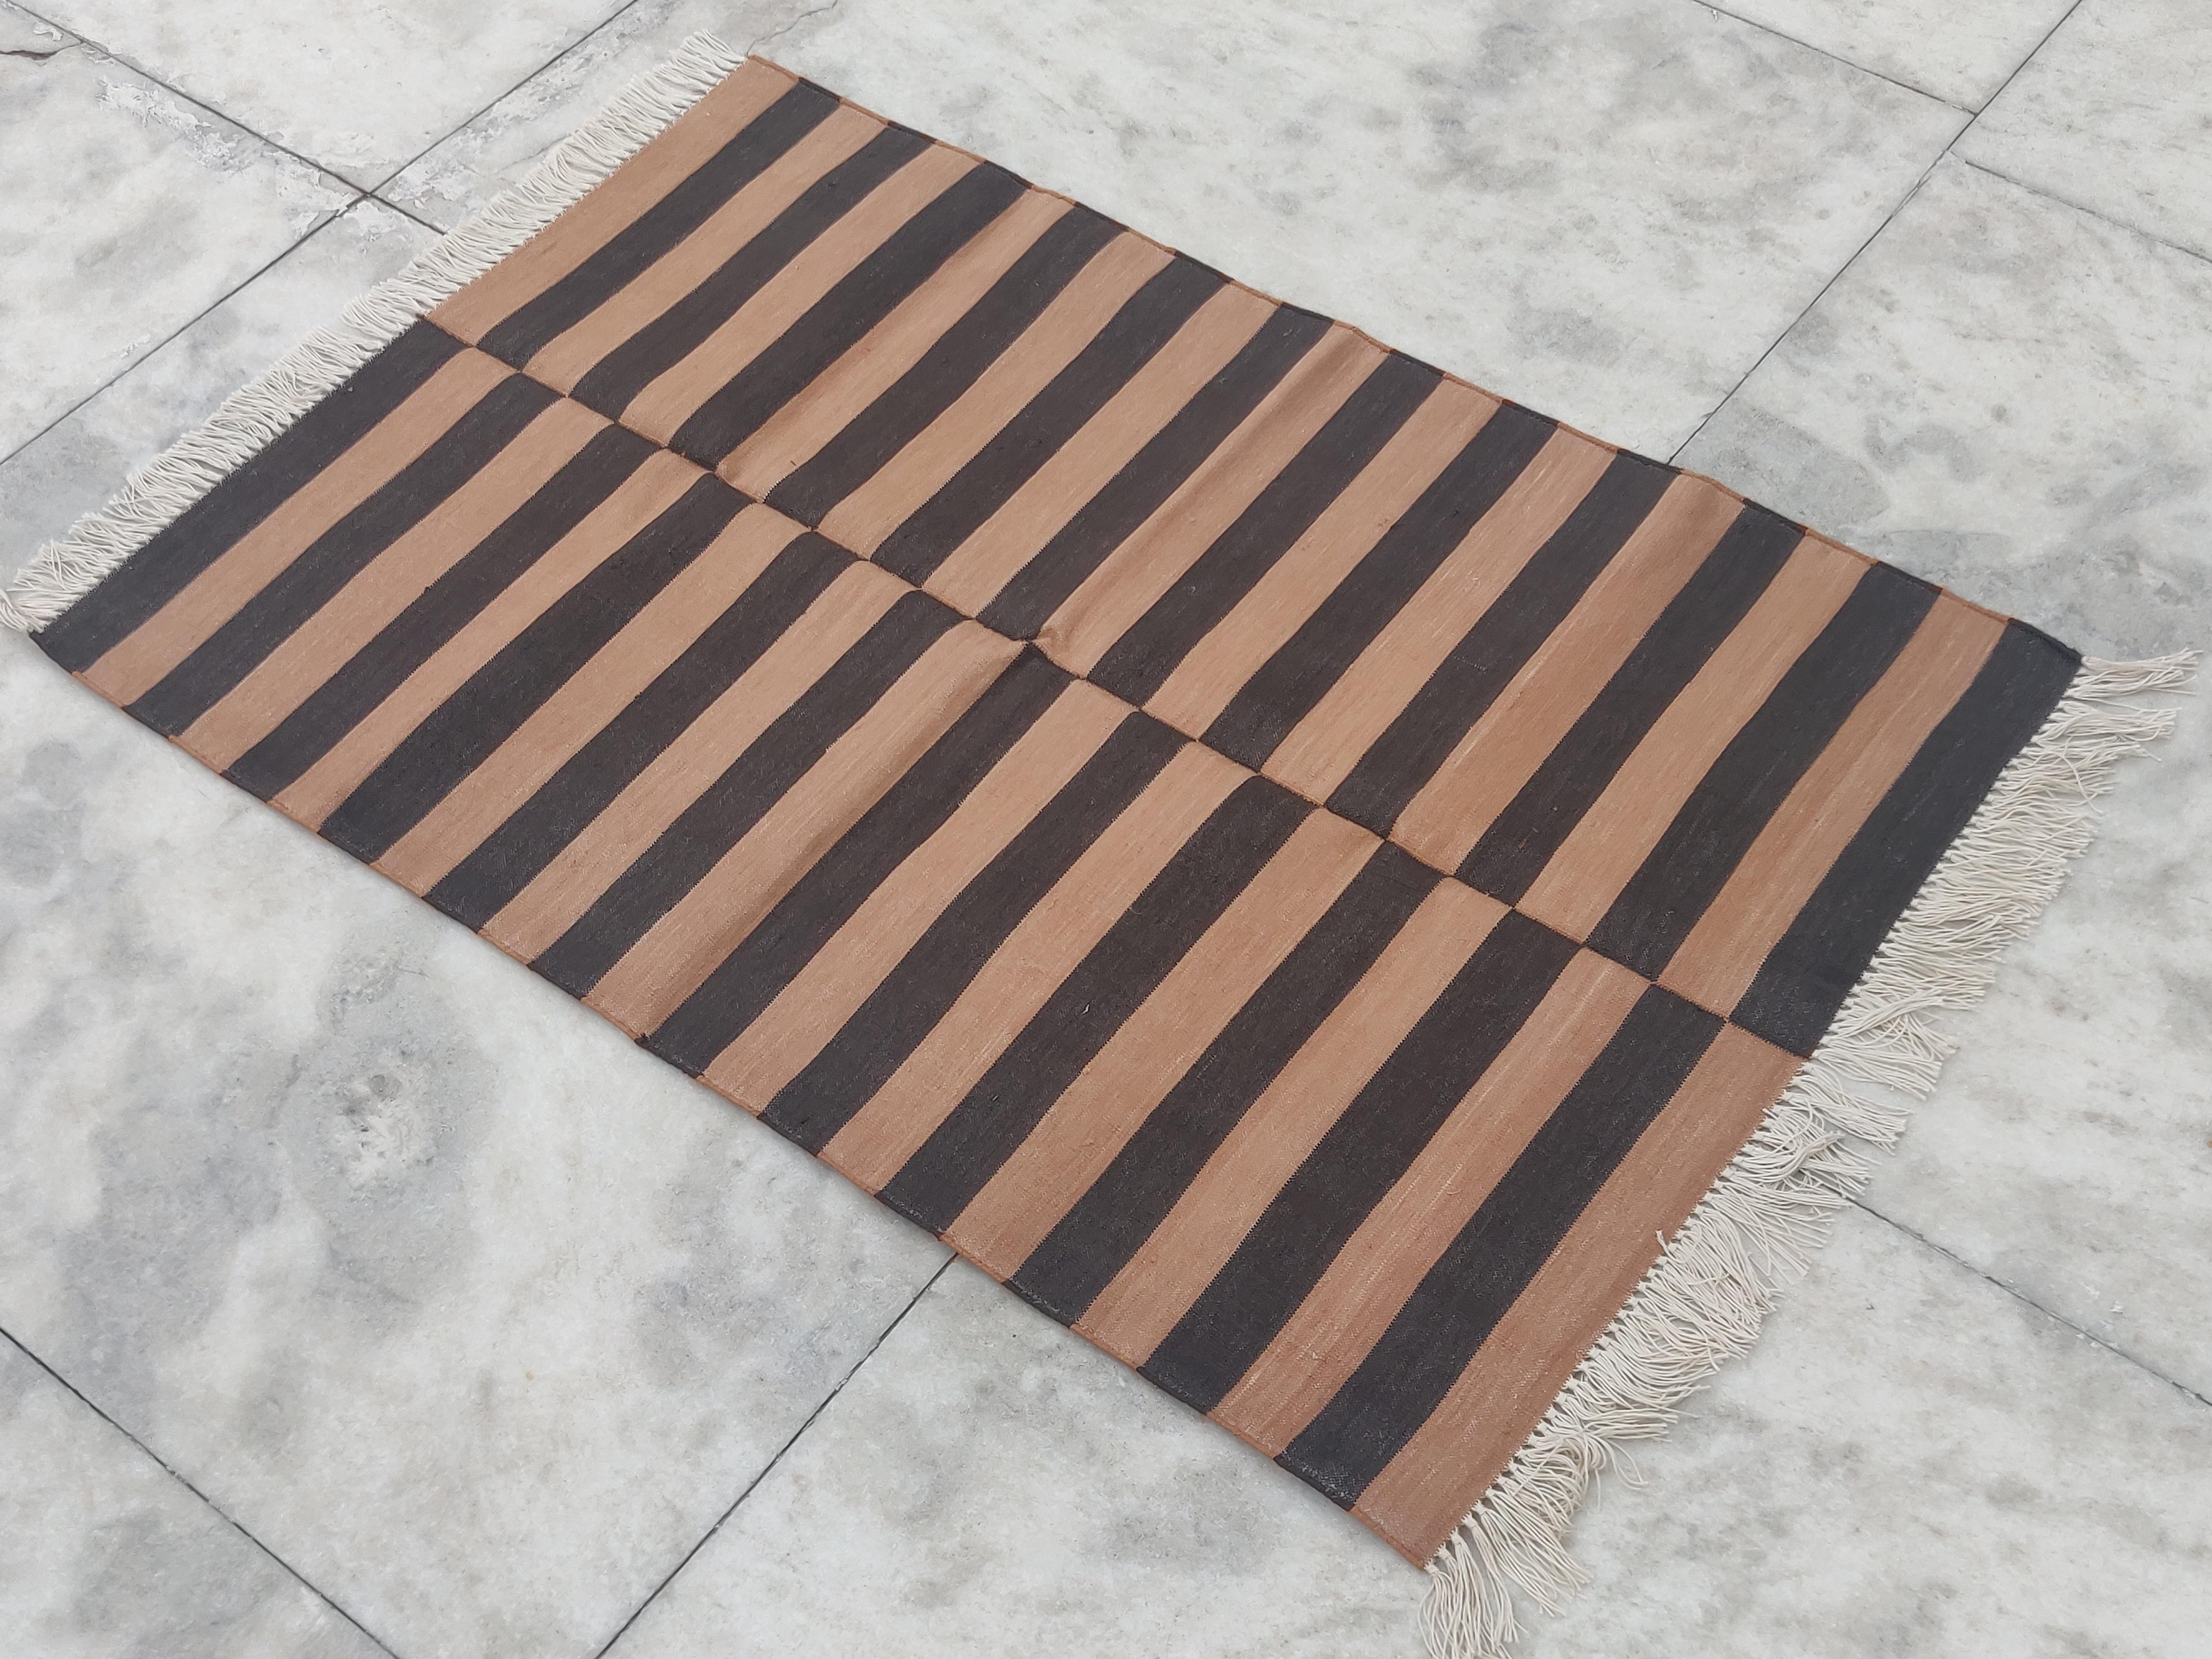 Cotton Vegetable Dyed  Tan And Brown Striped Indian Dhurrie Rug - 2.5'x4' (75x120cm) 

These special flat-weave dhurries are hand-woven with 15 ply 100% cotton yarn. Due to the special manufacturing techniques used to create our rugs, the size and